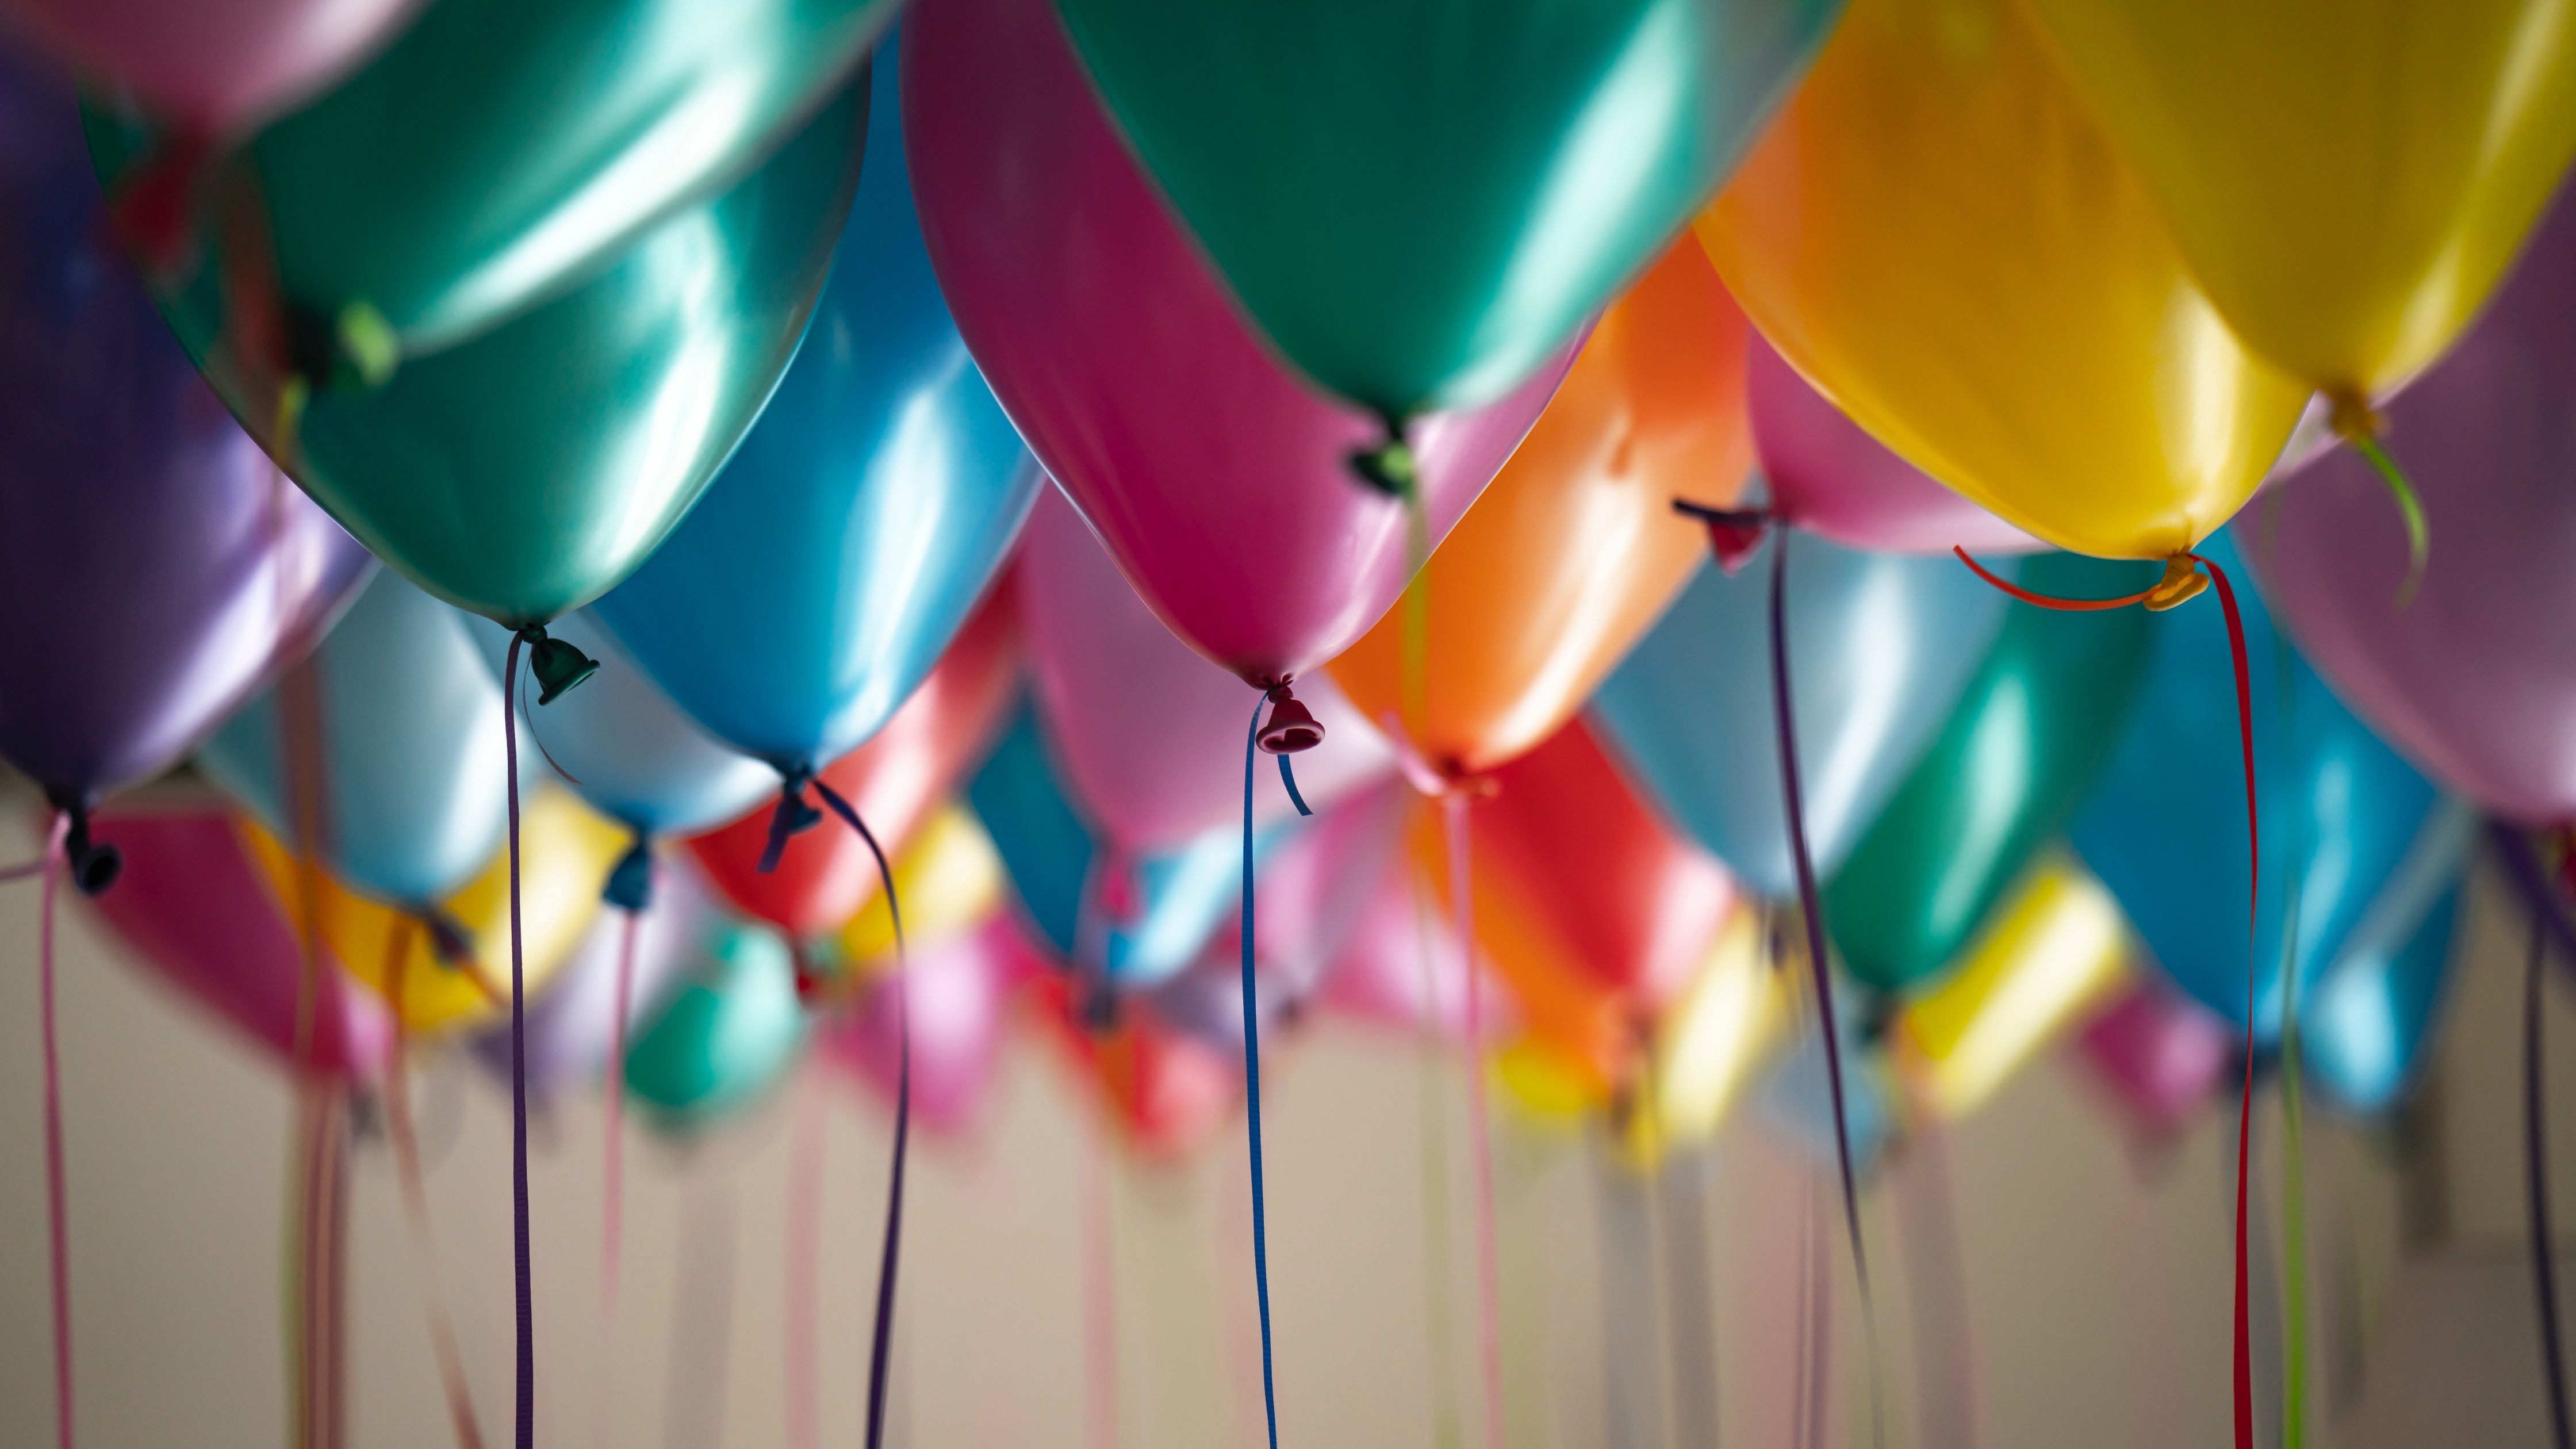 A group of colorful balloons floating in the air. - Balloons, birthday